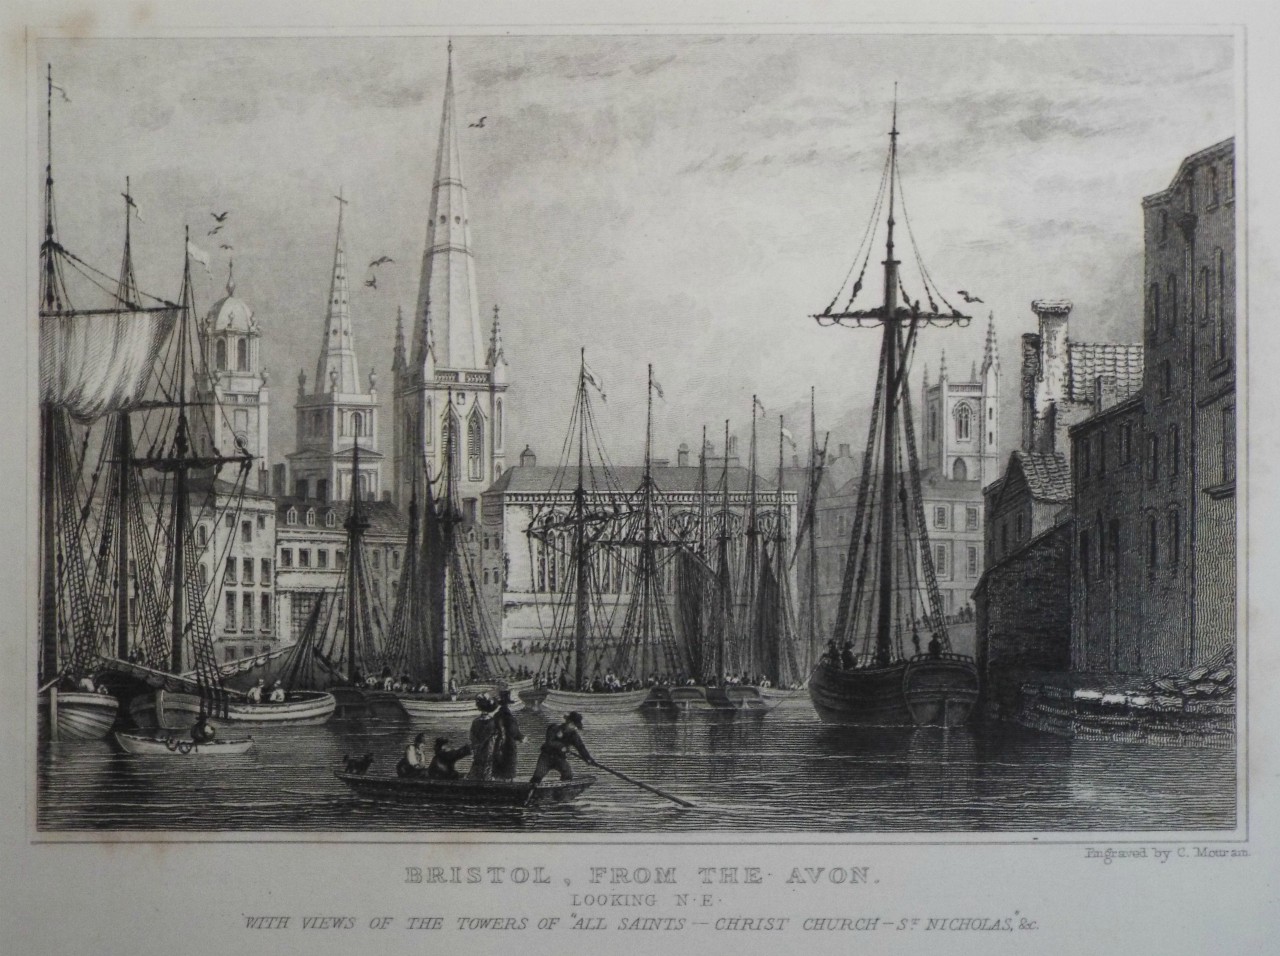 Print - Bristol, from the Avon. Looking N. E. With Views of the Towers of All Saints. Chist Church, St. Nicholas &c. - Mottram